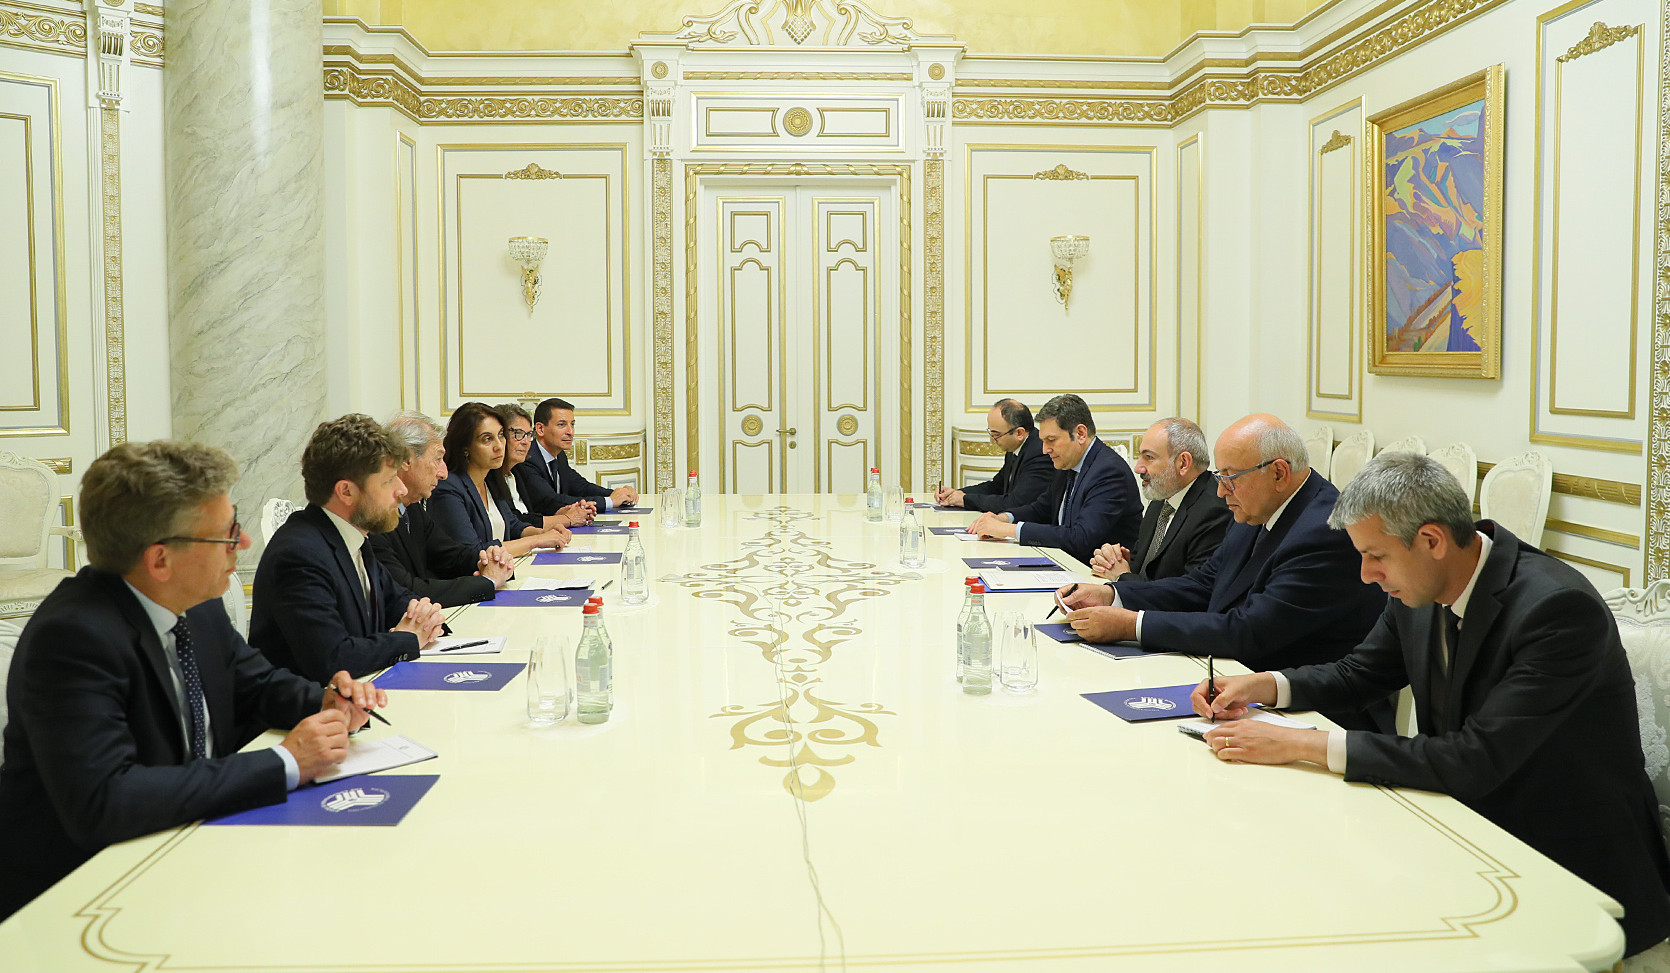 France is one of our primary partners: Pashinyan received delegation led by Georges Siffredi